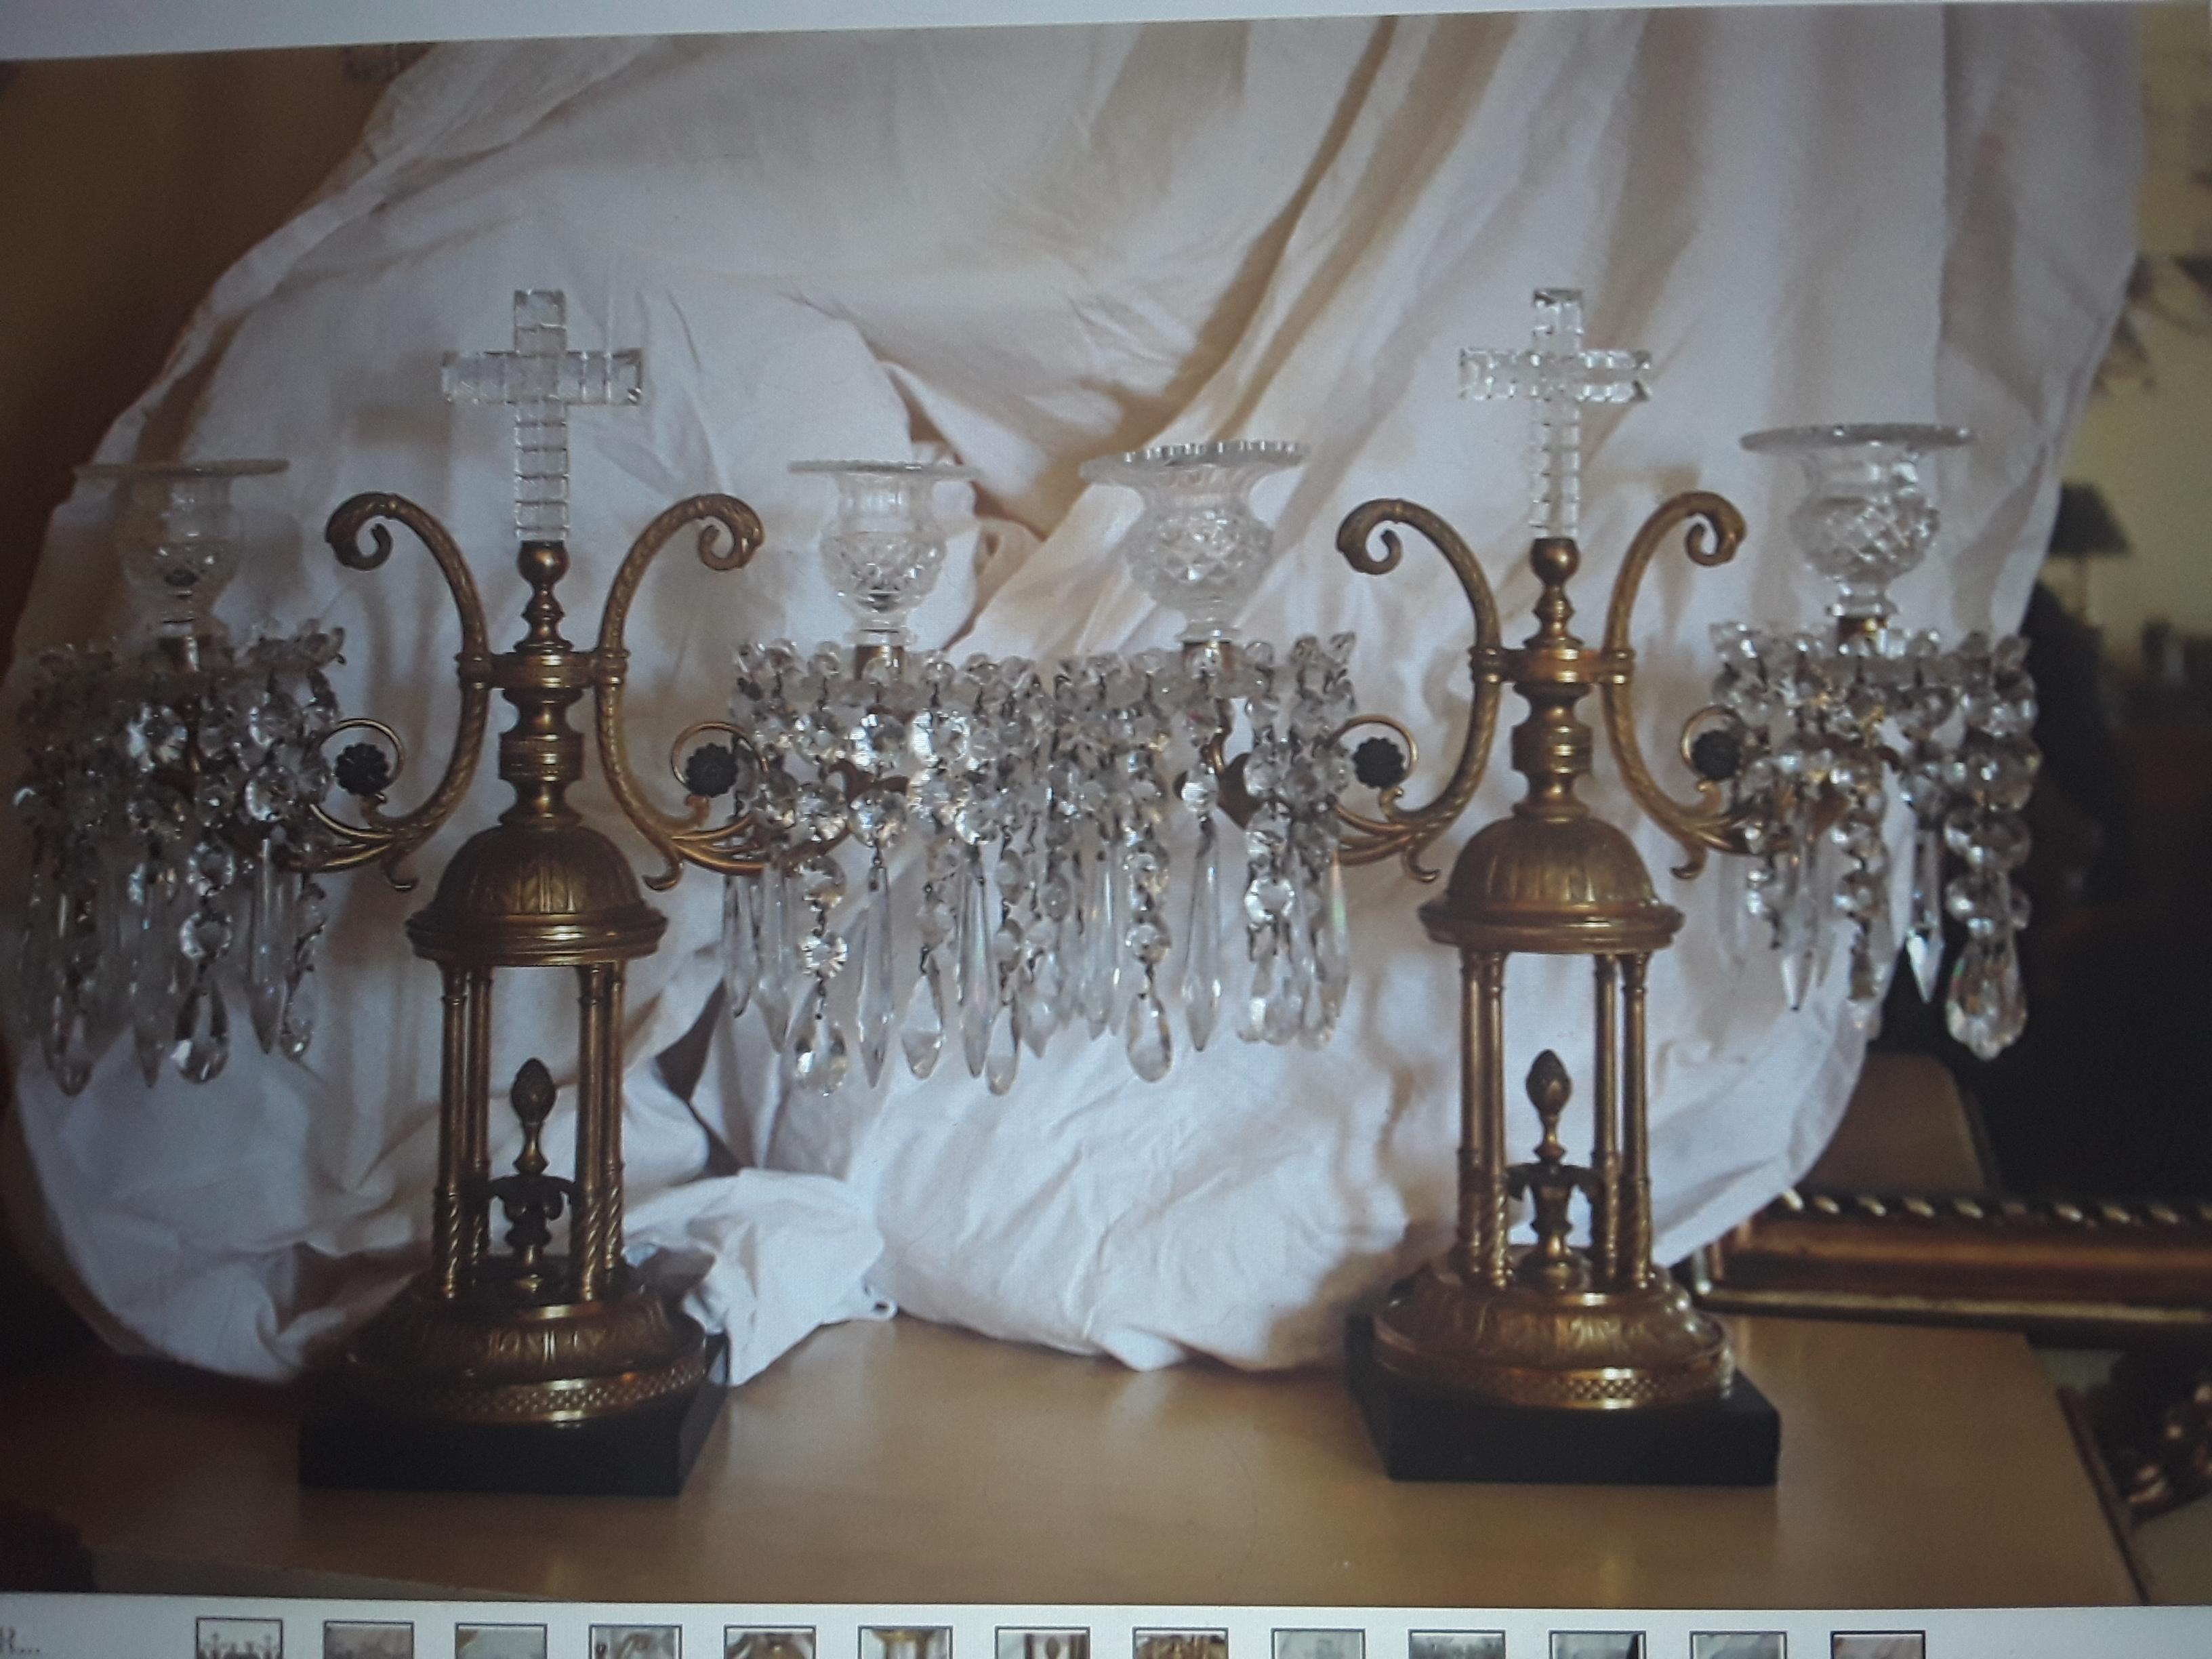 Amazing Pair of 18thc Georgian Expertly Cut Glass Candelabra/ Girandoles/ Candle Lamps. There is Rotunda detail, Cross Detail. These are amazing! There are a couple of professional restorations to bobesche, not noticeable and not detracting. One of